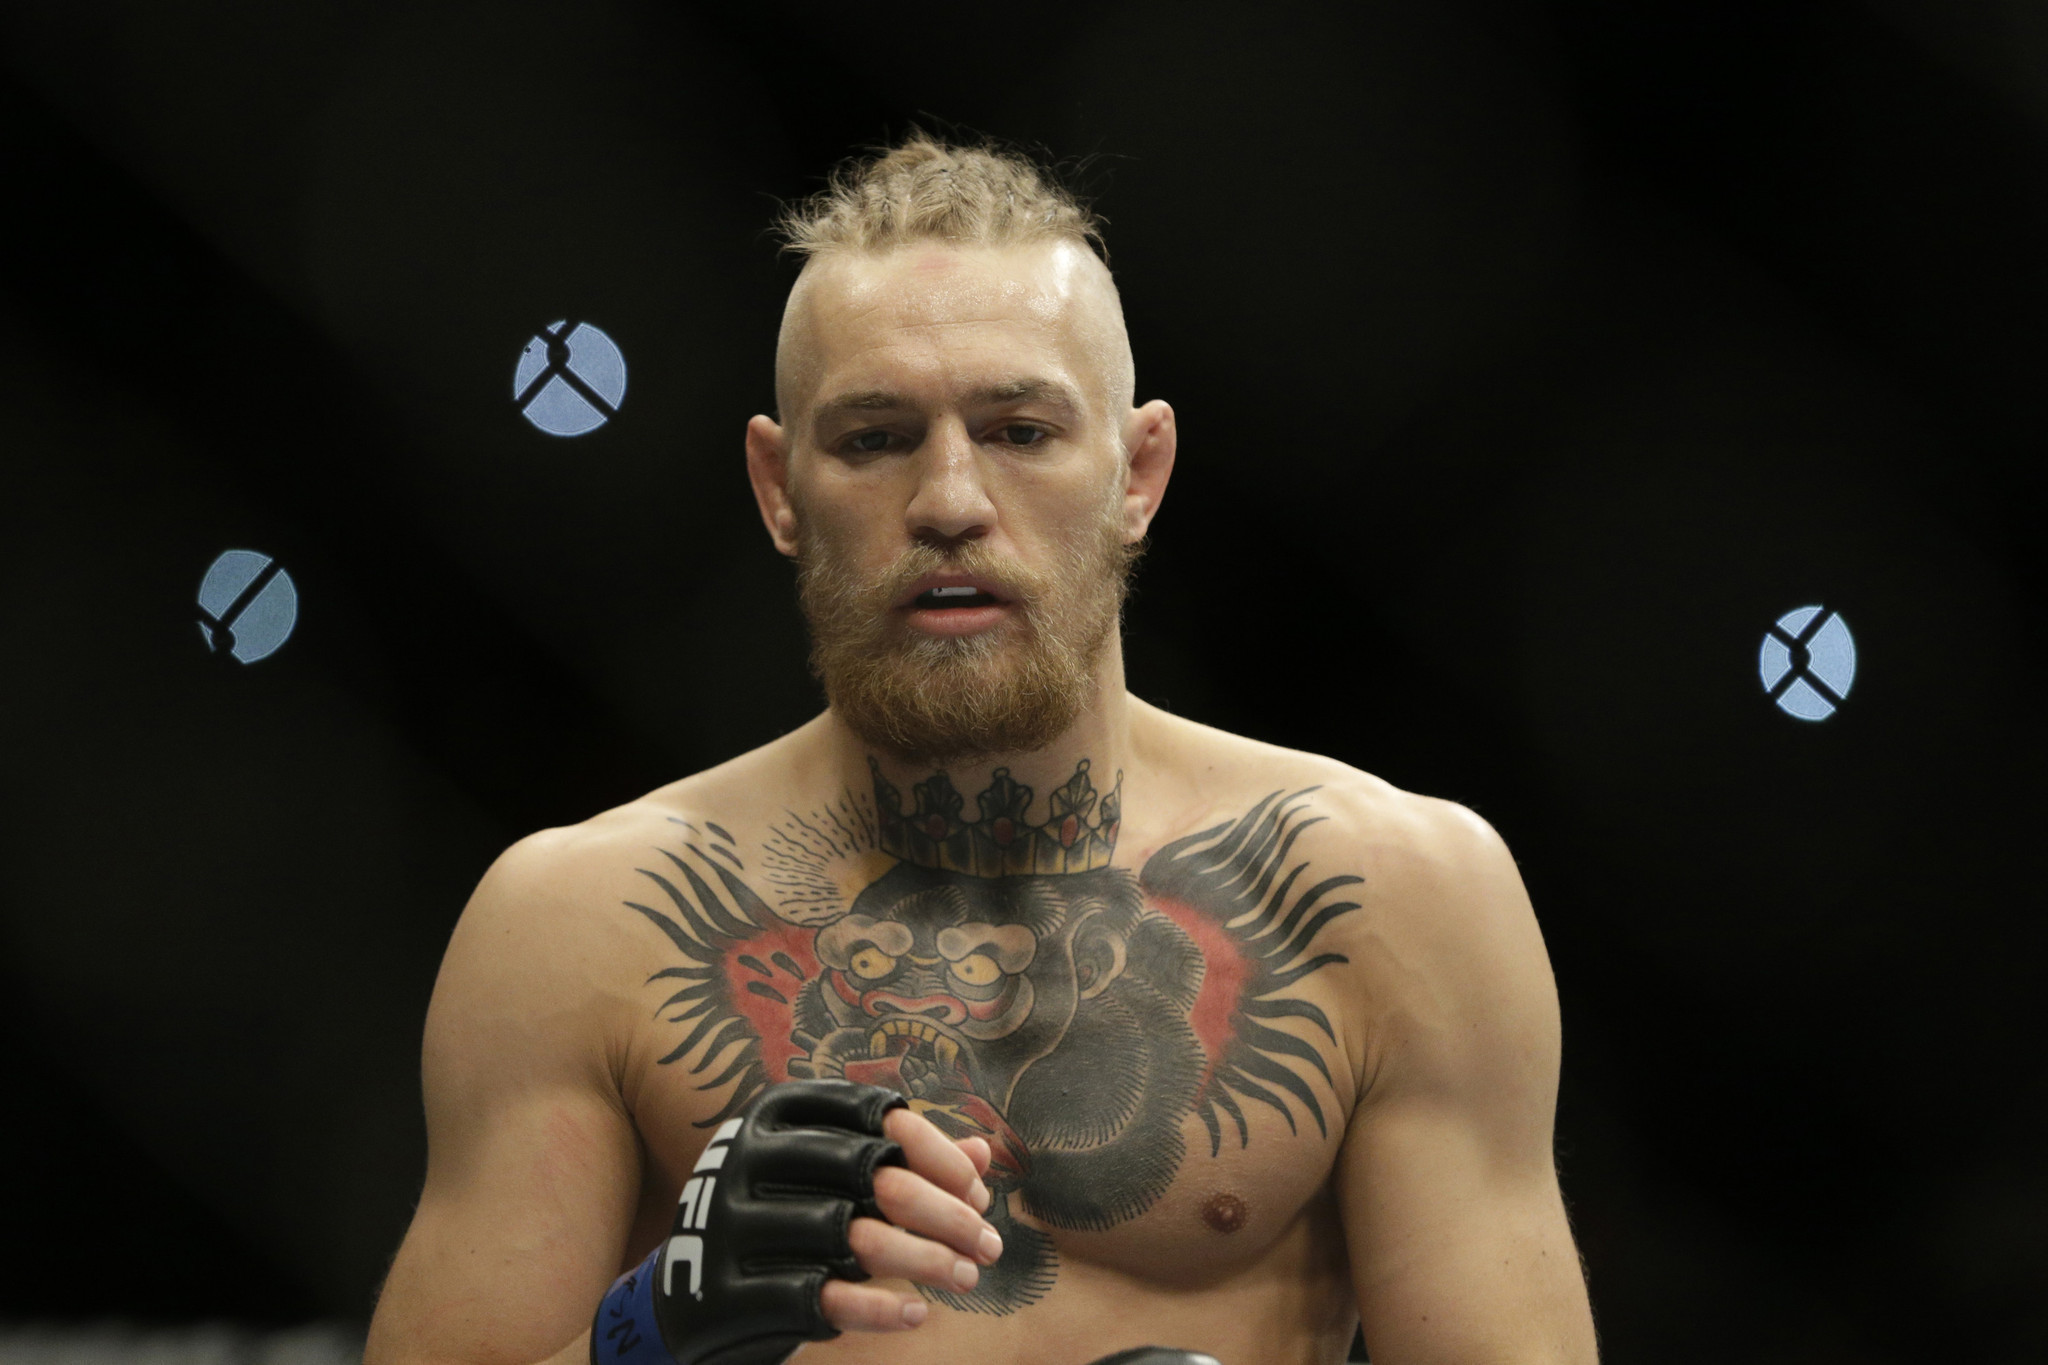 2048x1365 ... conor mcgregor hd wallpapers free download in high quality and ...